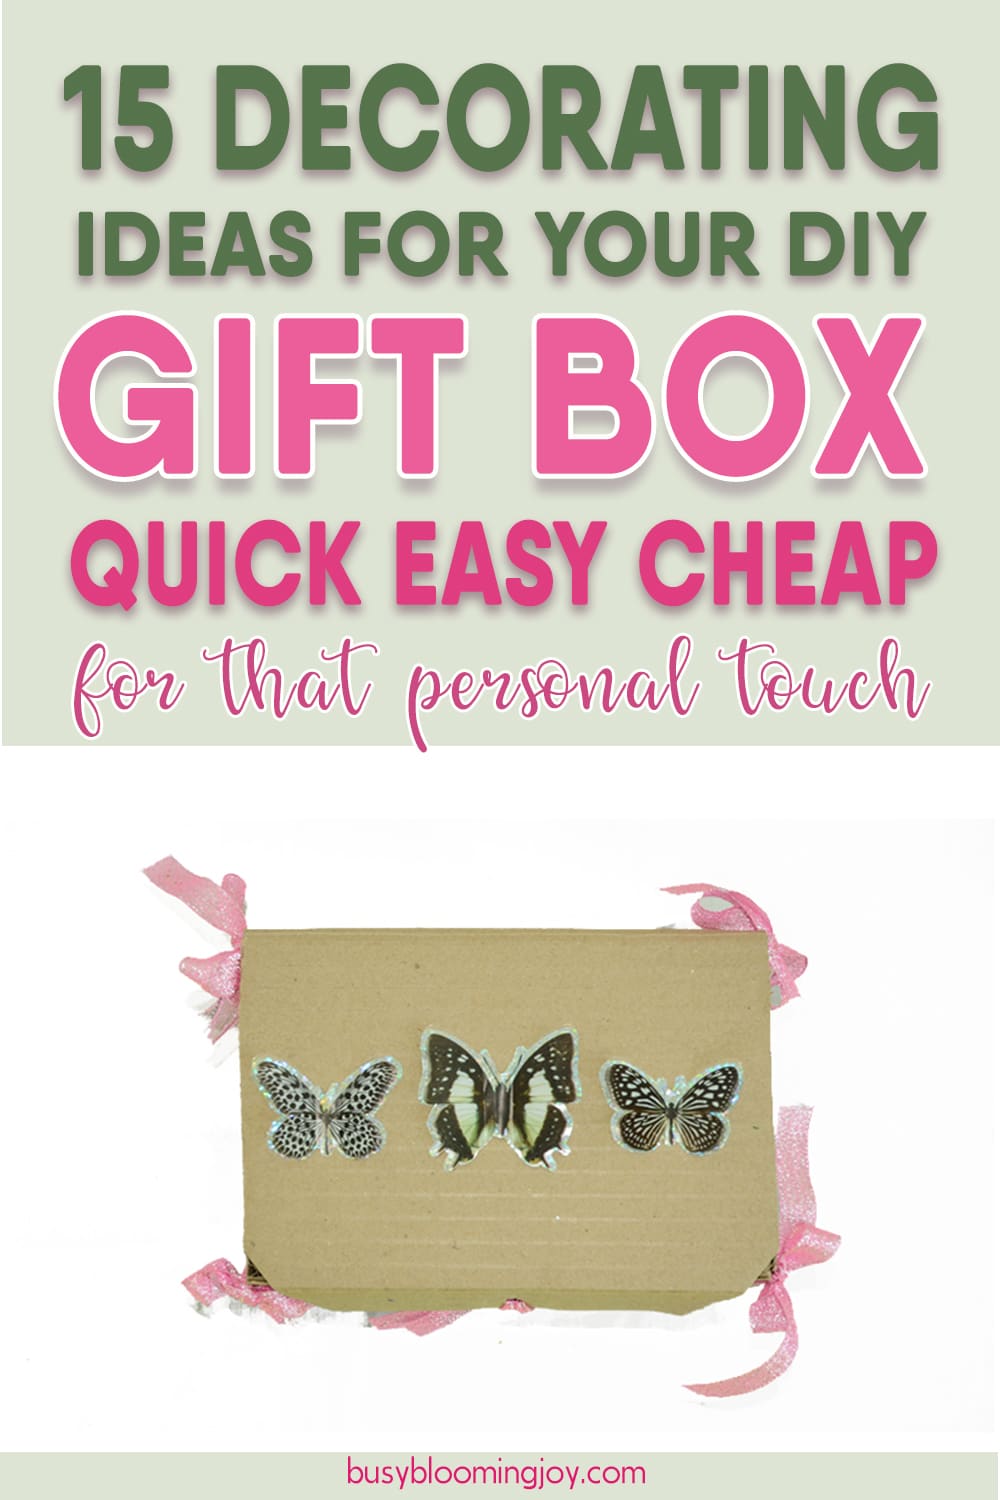 15 Simple And Stunning Gift Box Decoration Ideas